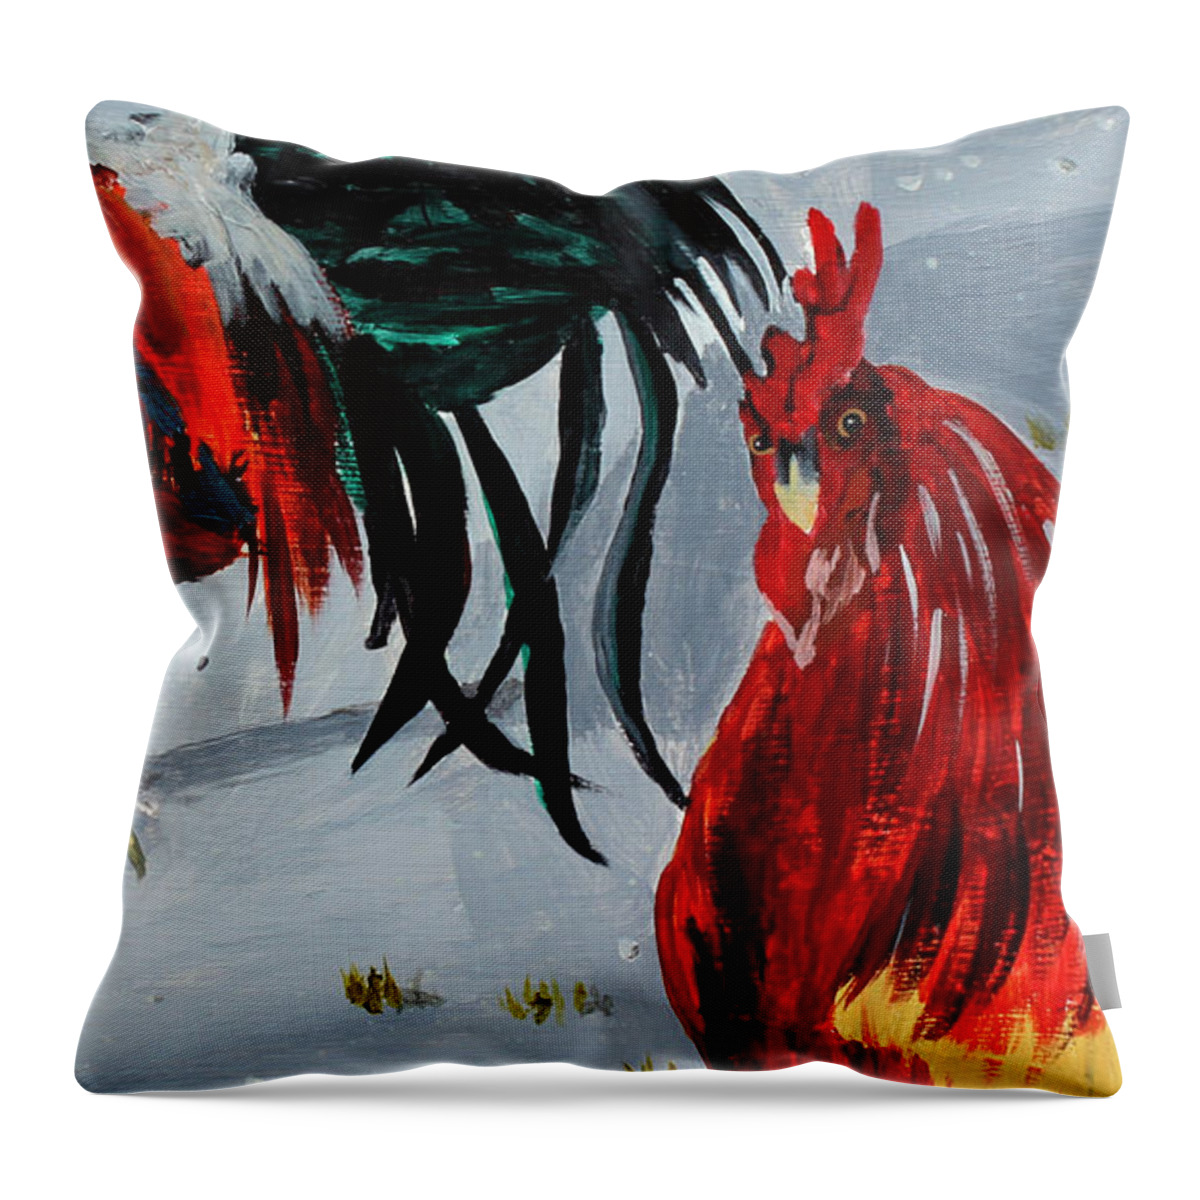 Roosters Throw Pillow featuring the painting New Harmony Roosters by Jaime Haney